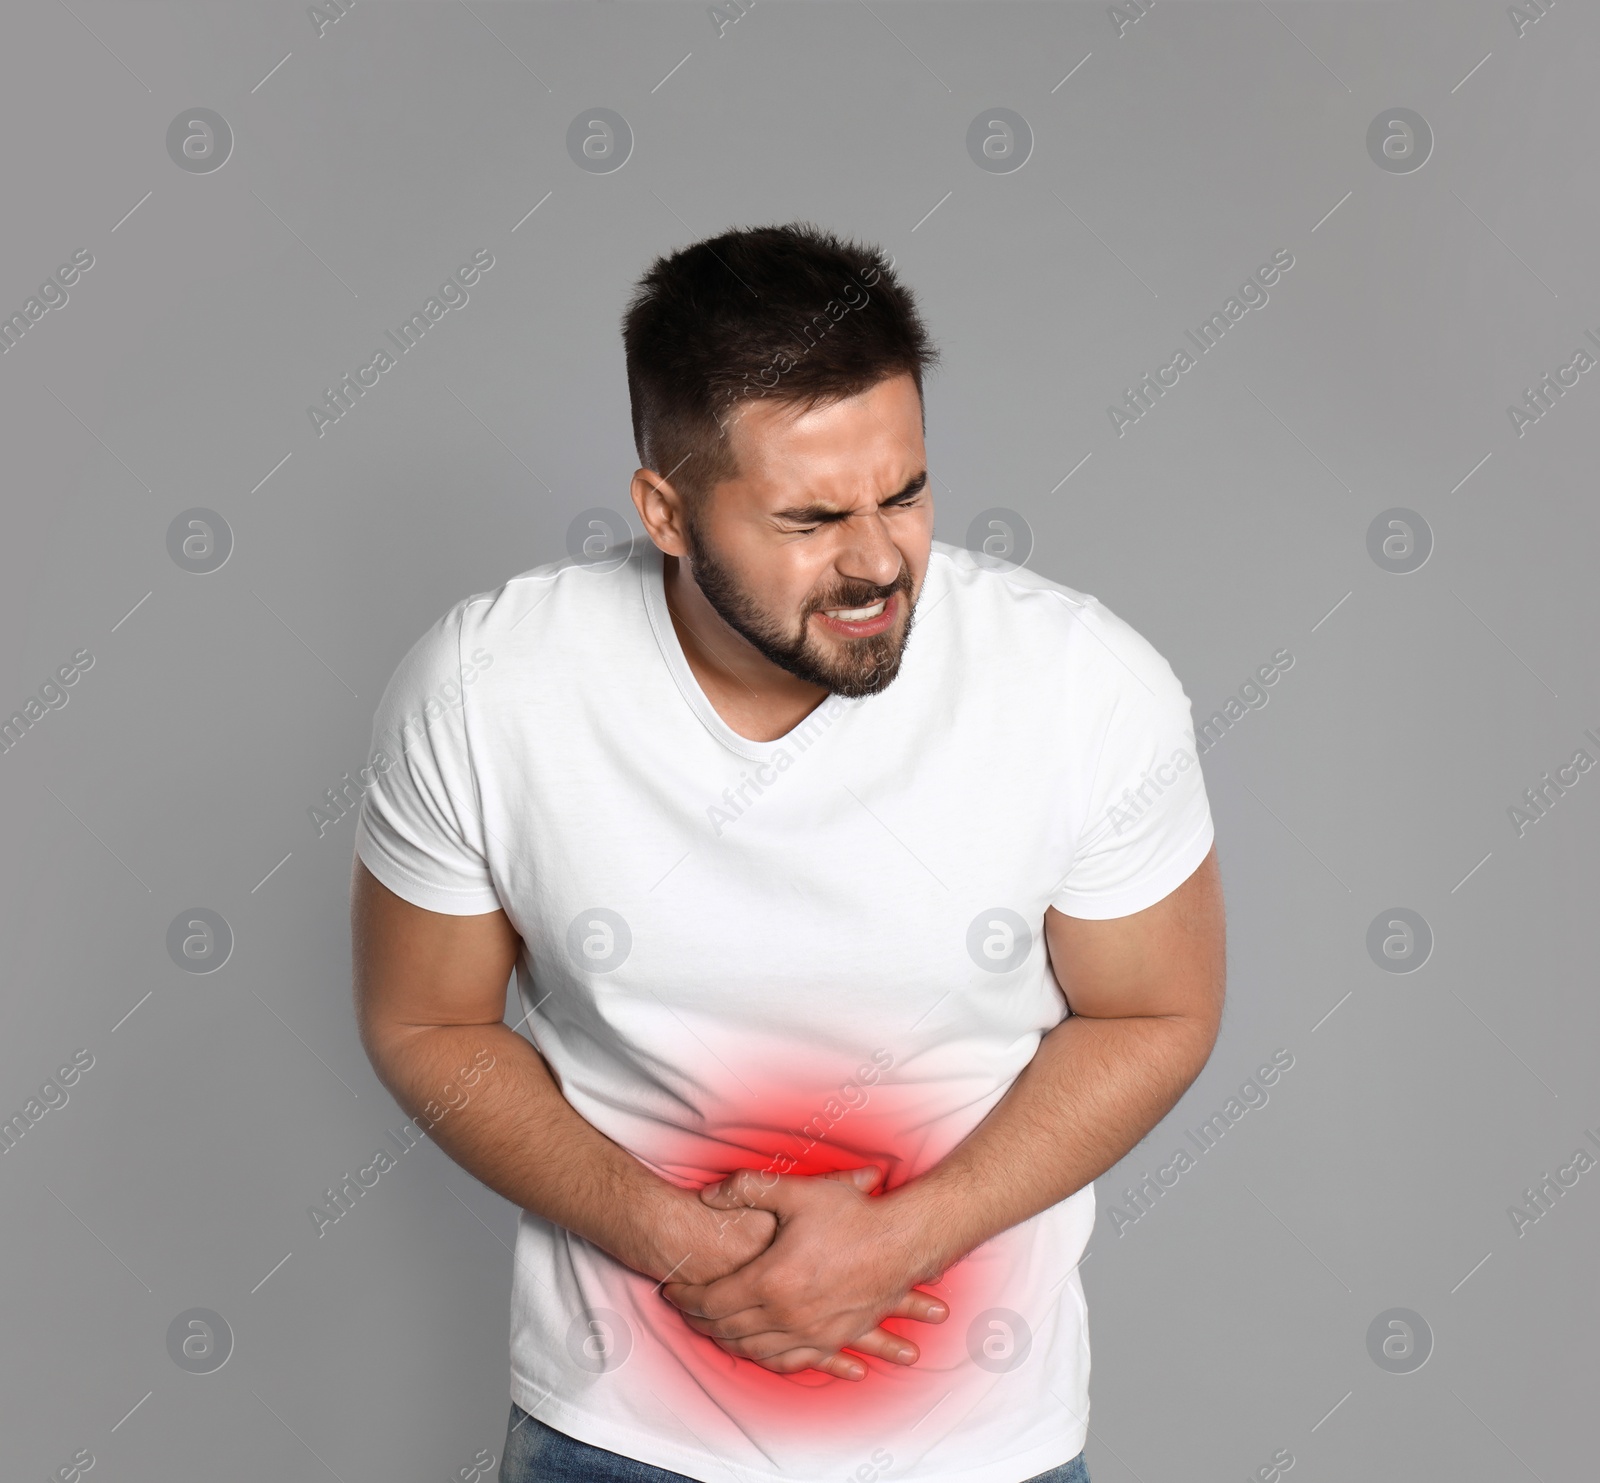 Image of Man suffering from abdominal pain on grey background